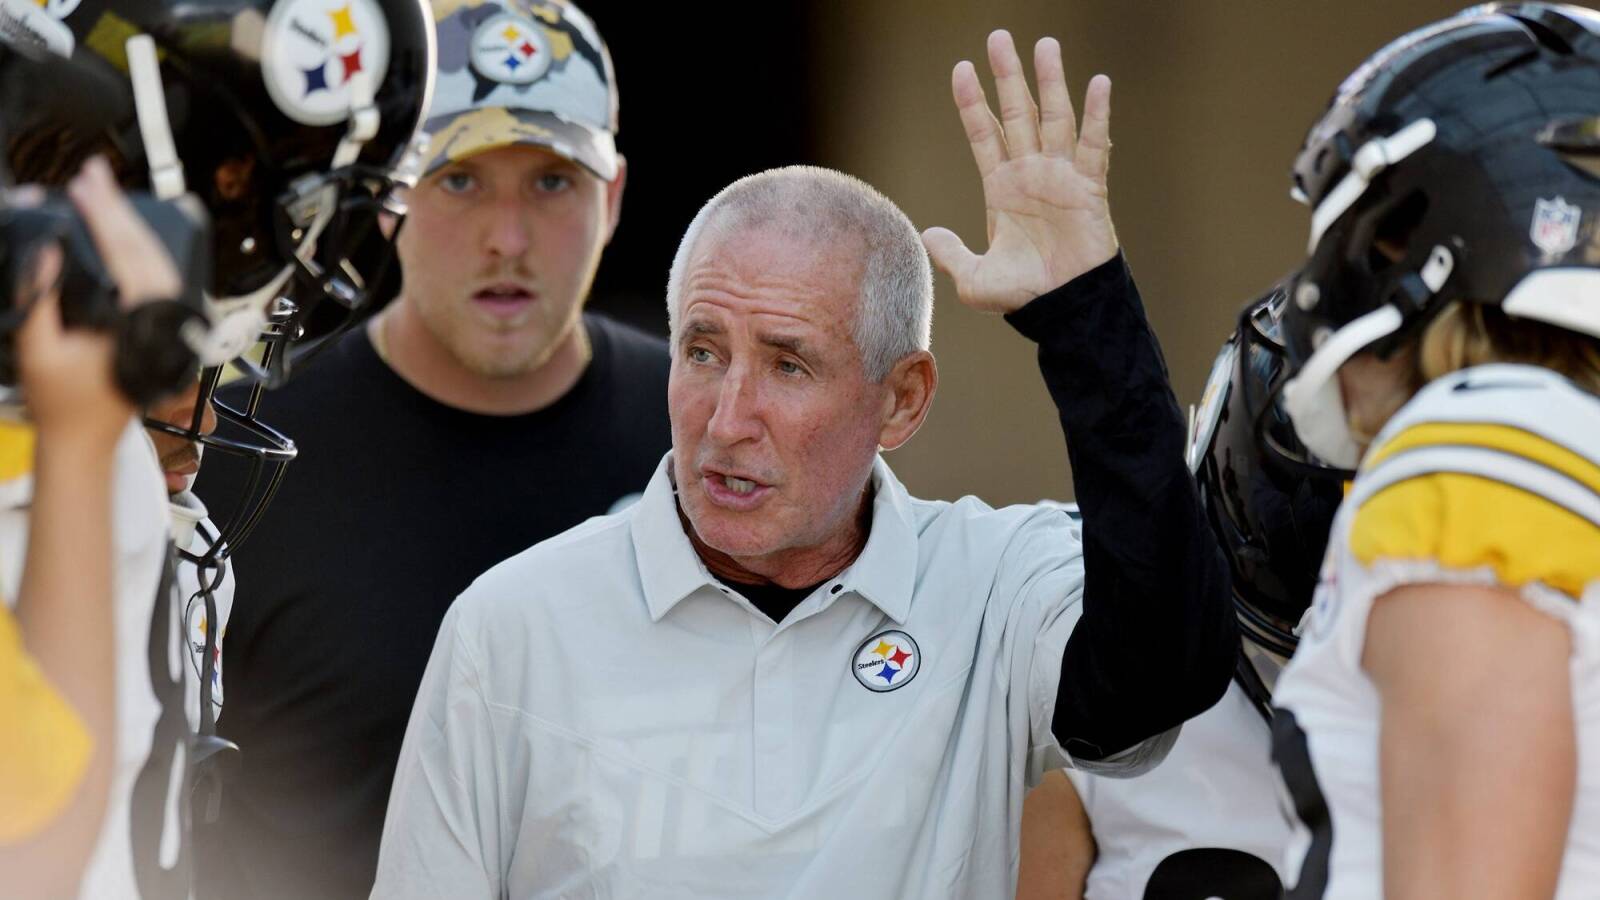 How undrafted Steeler saved coach from getting severely injured